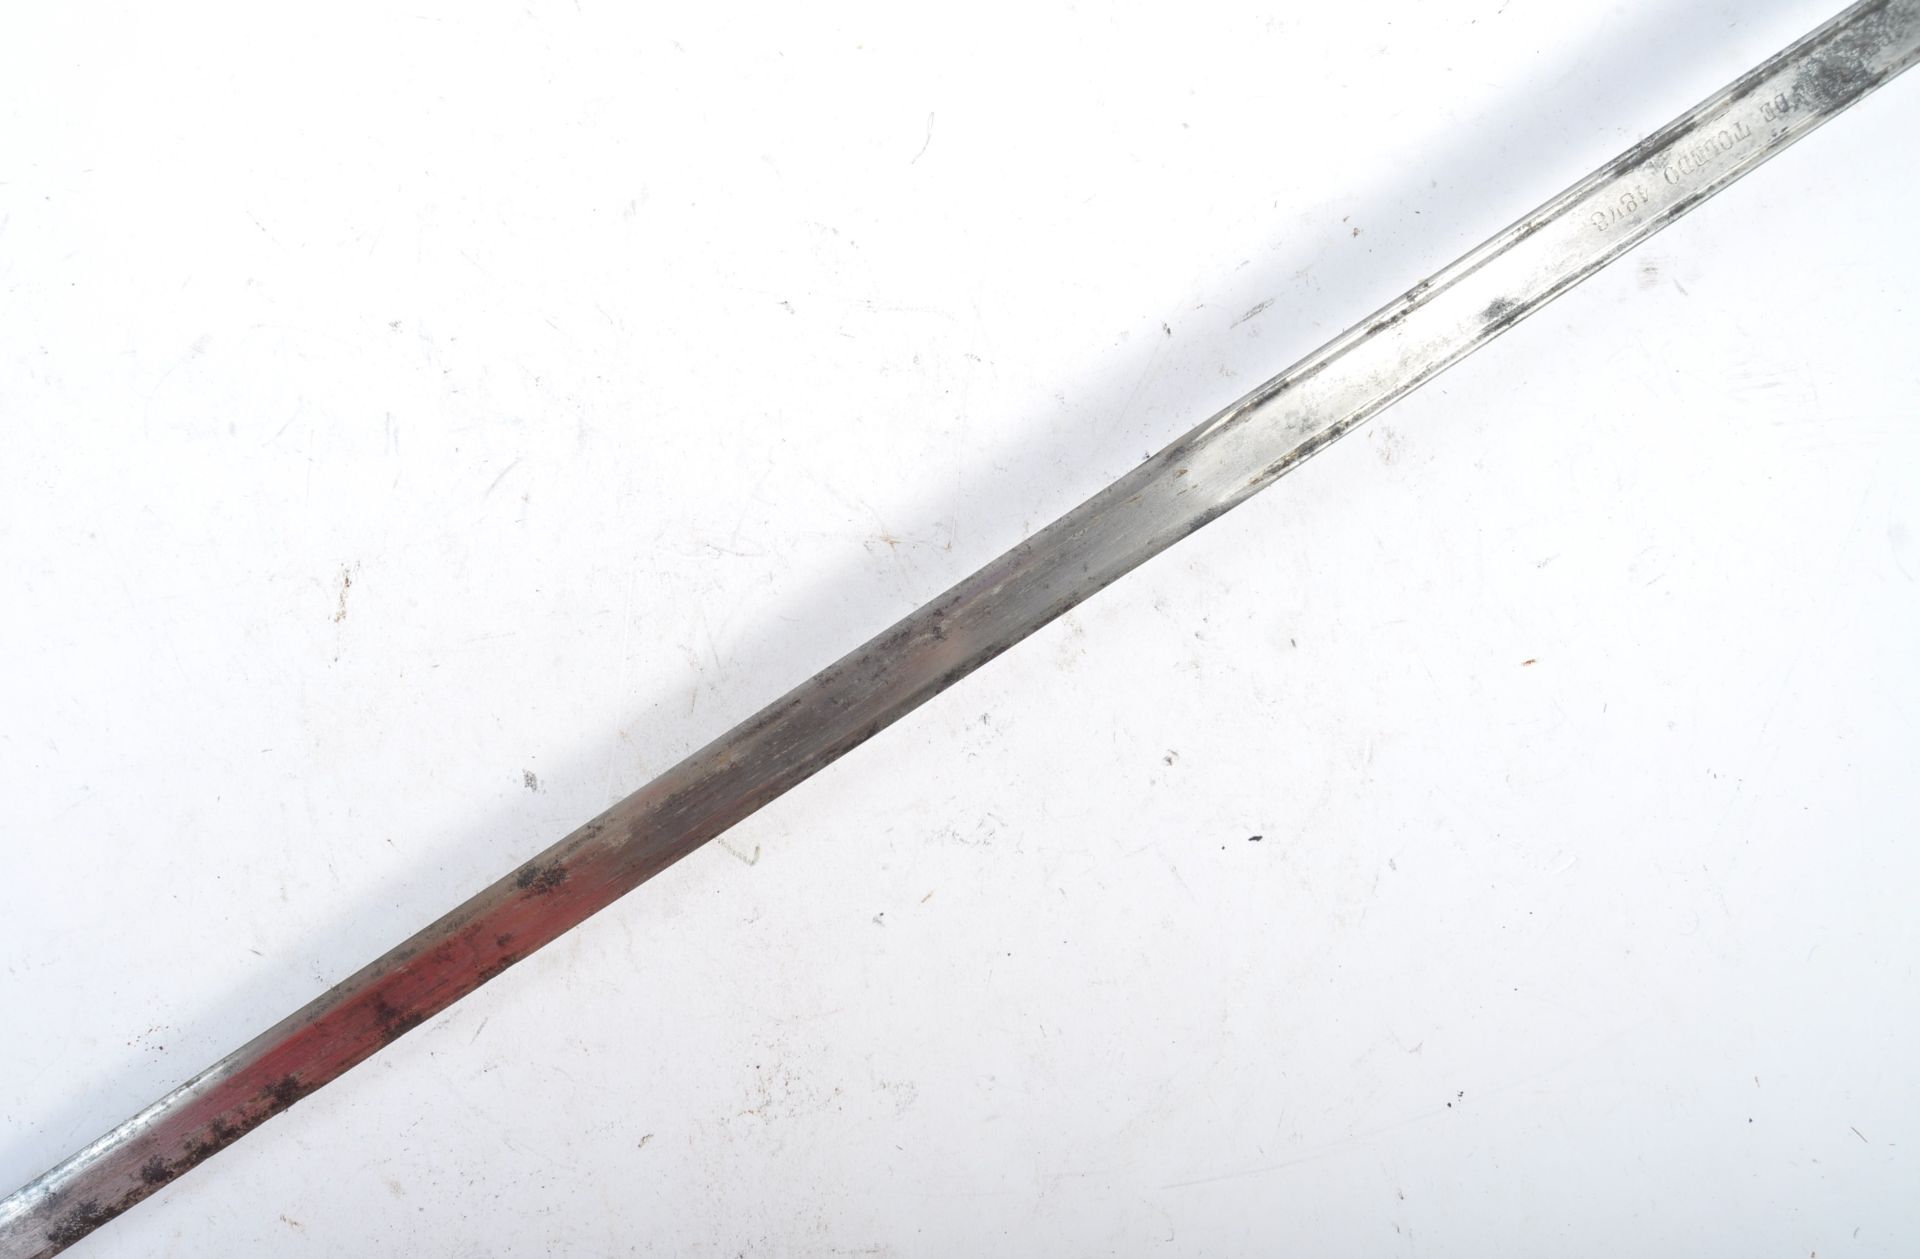 UNUSUAL 19TH CENTURY SCOTTISH OFFICERS SWORD WITH TOLEDO BLADE - Image 6 of 8